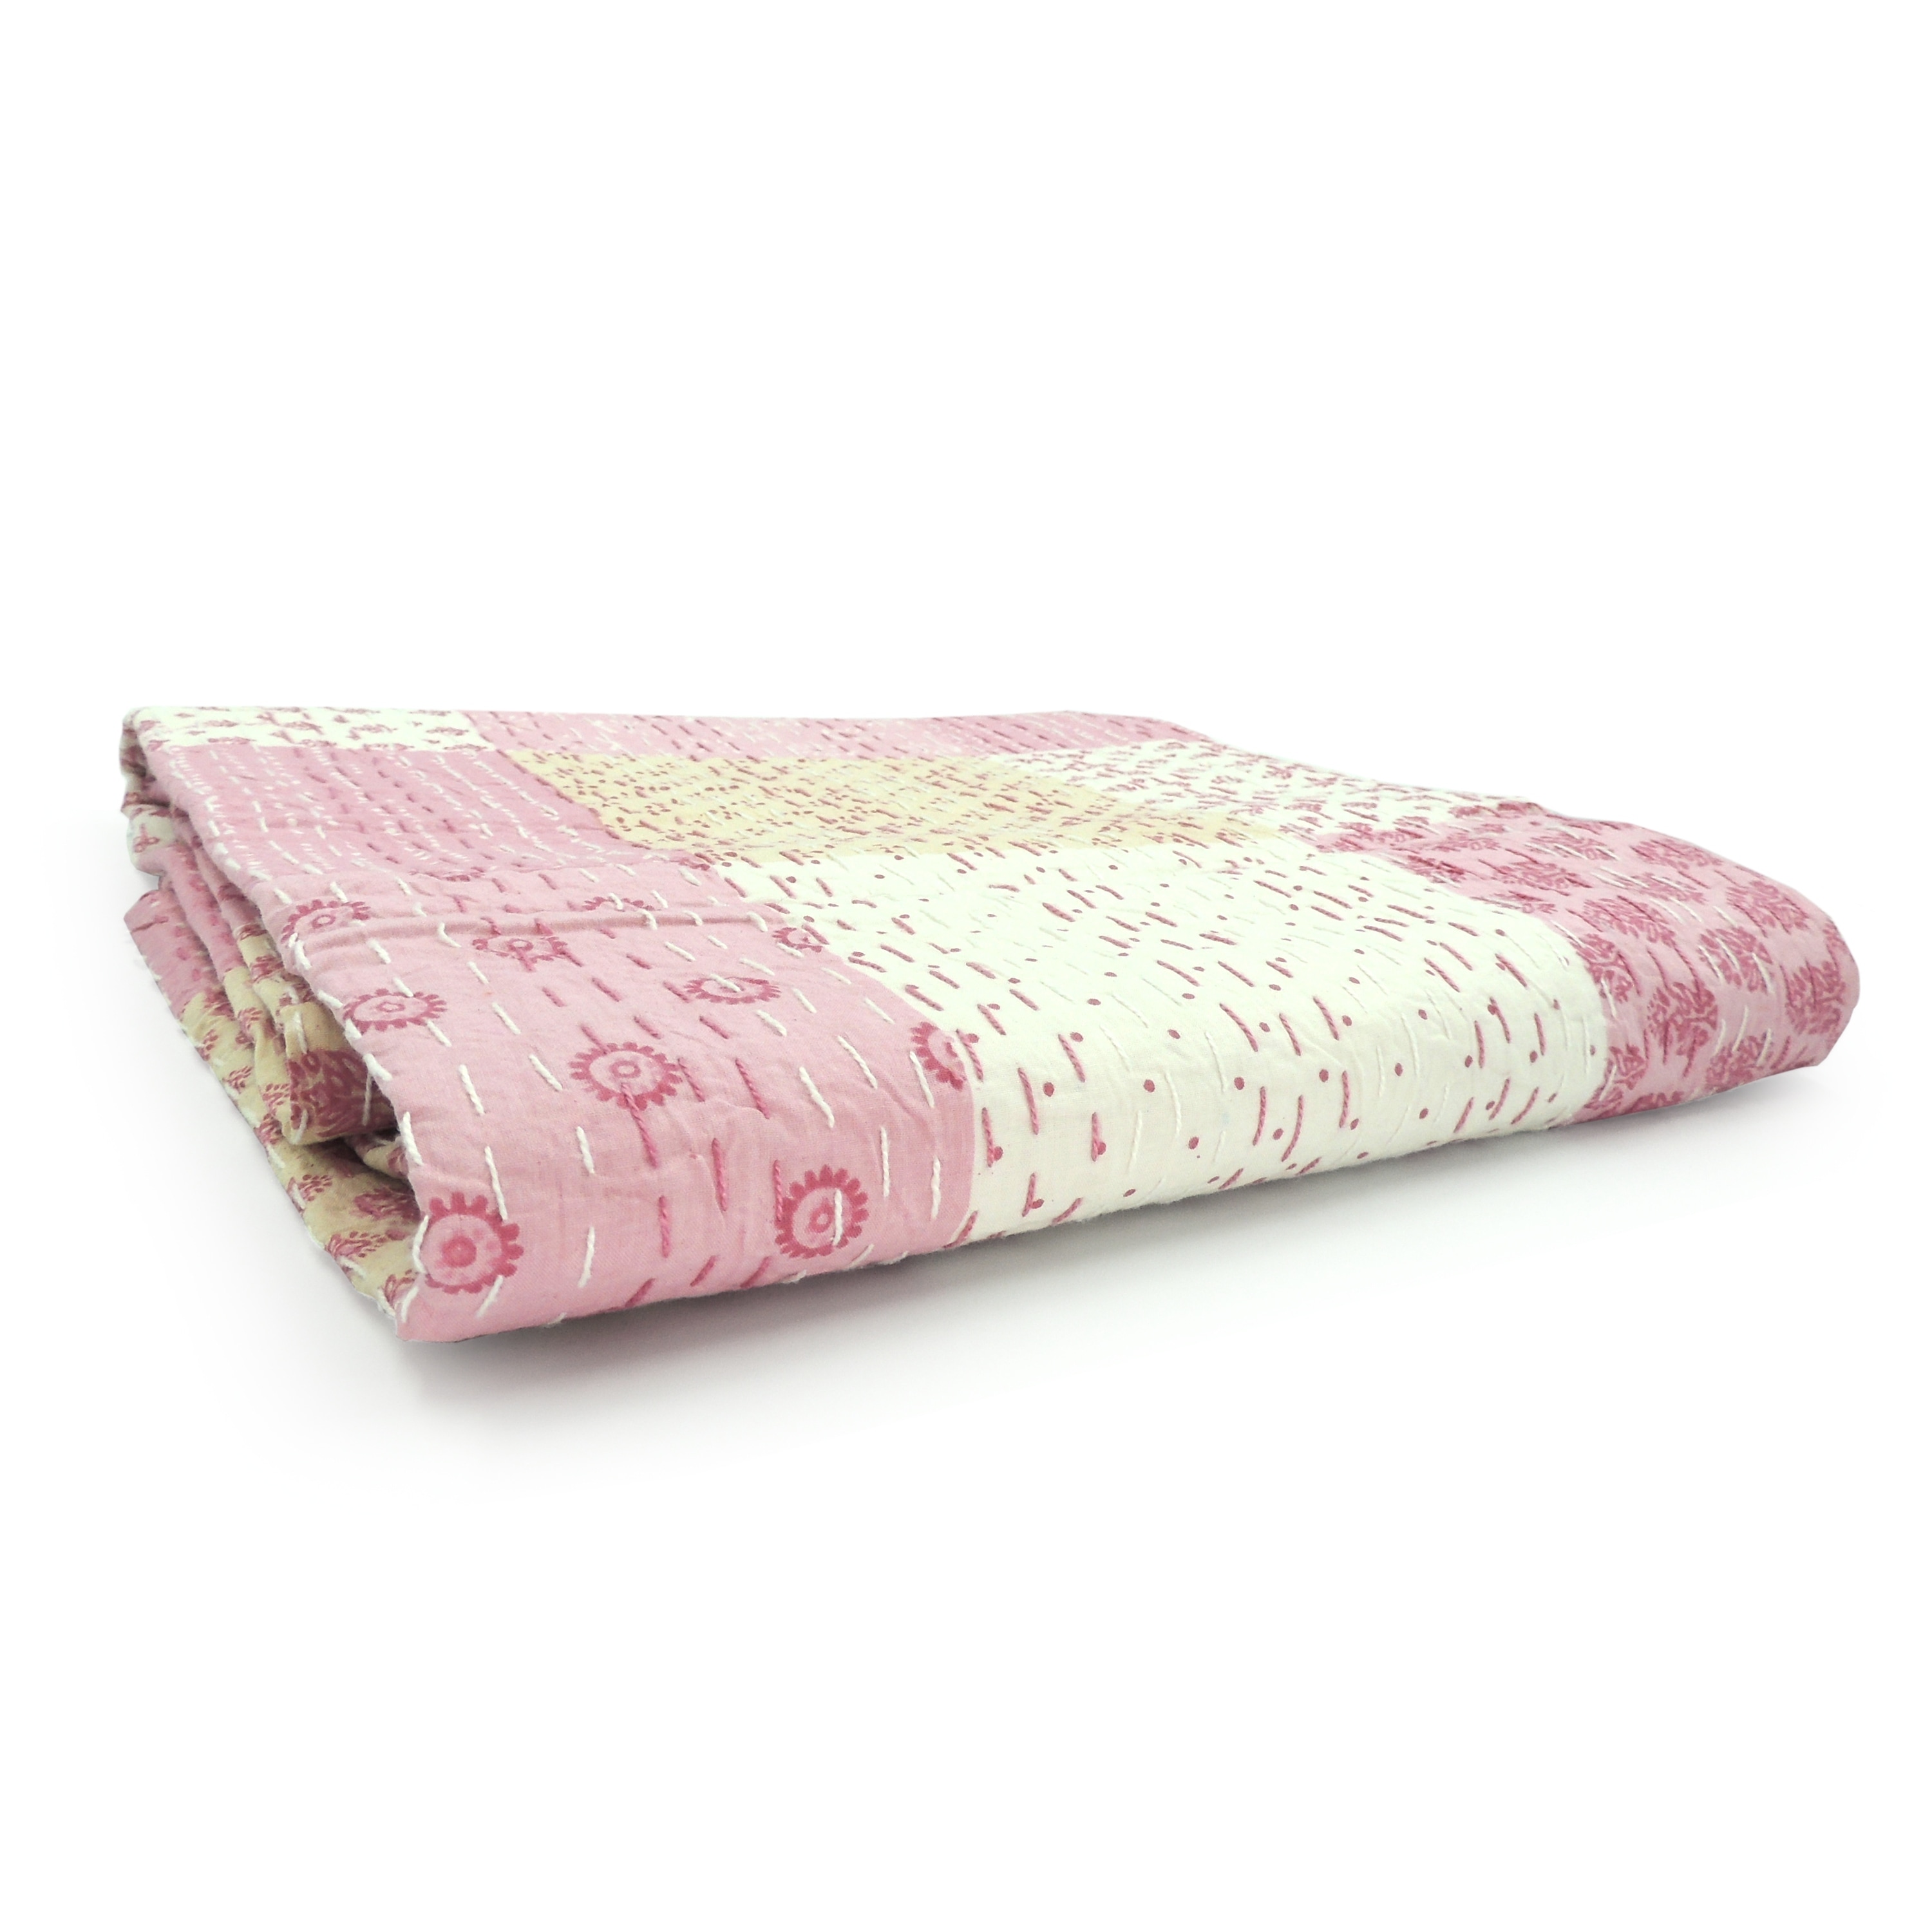 LR Home Hand-Stitched Natural Cotton Quilted Standard Size Throw Blanket